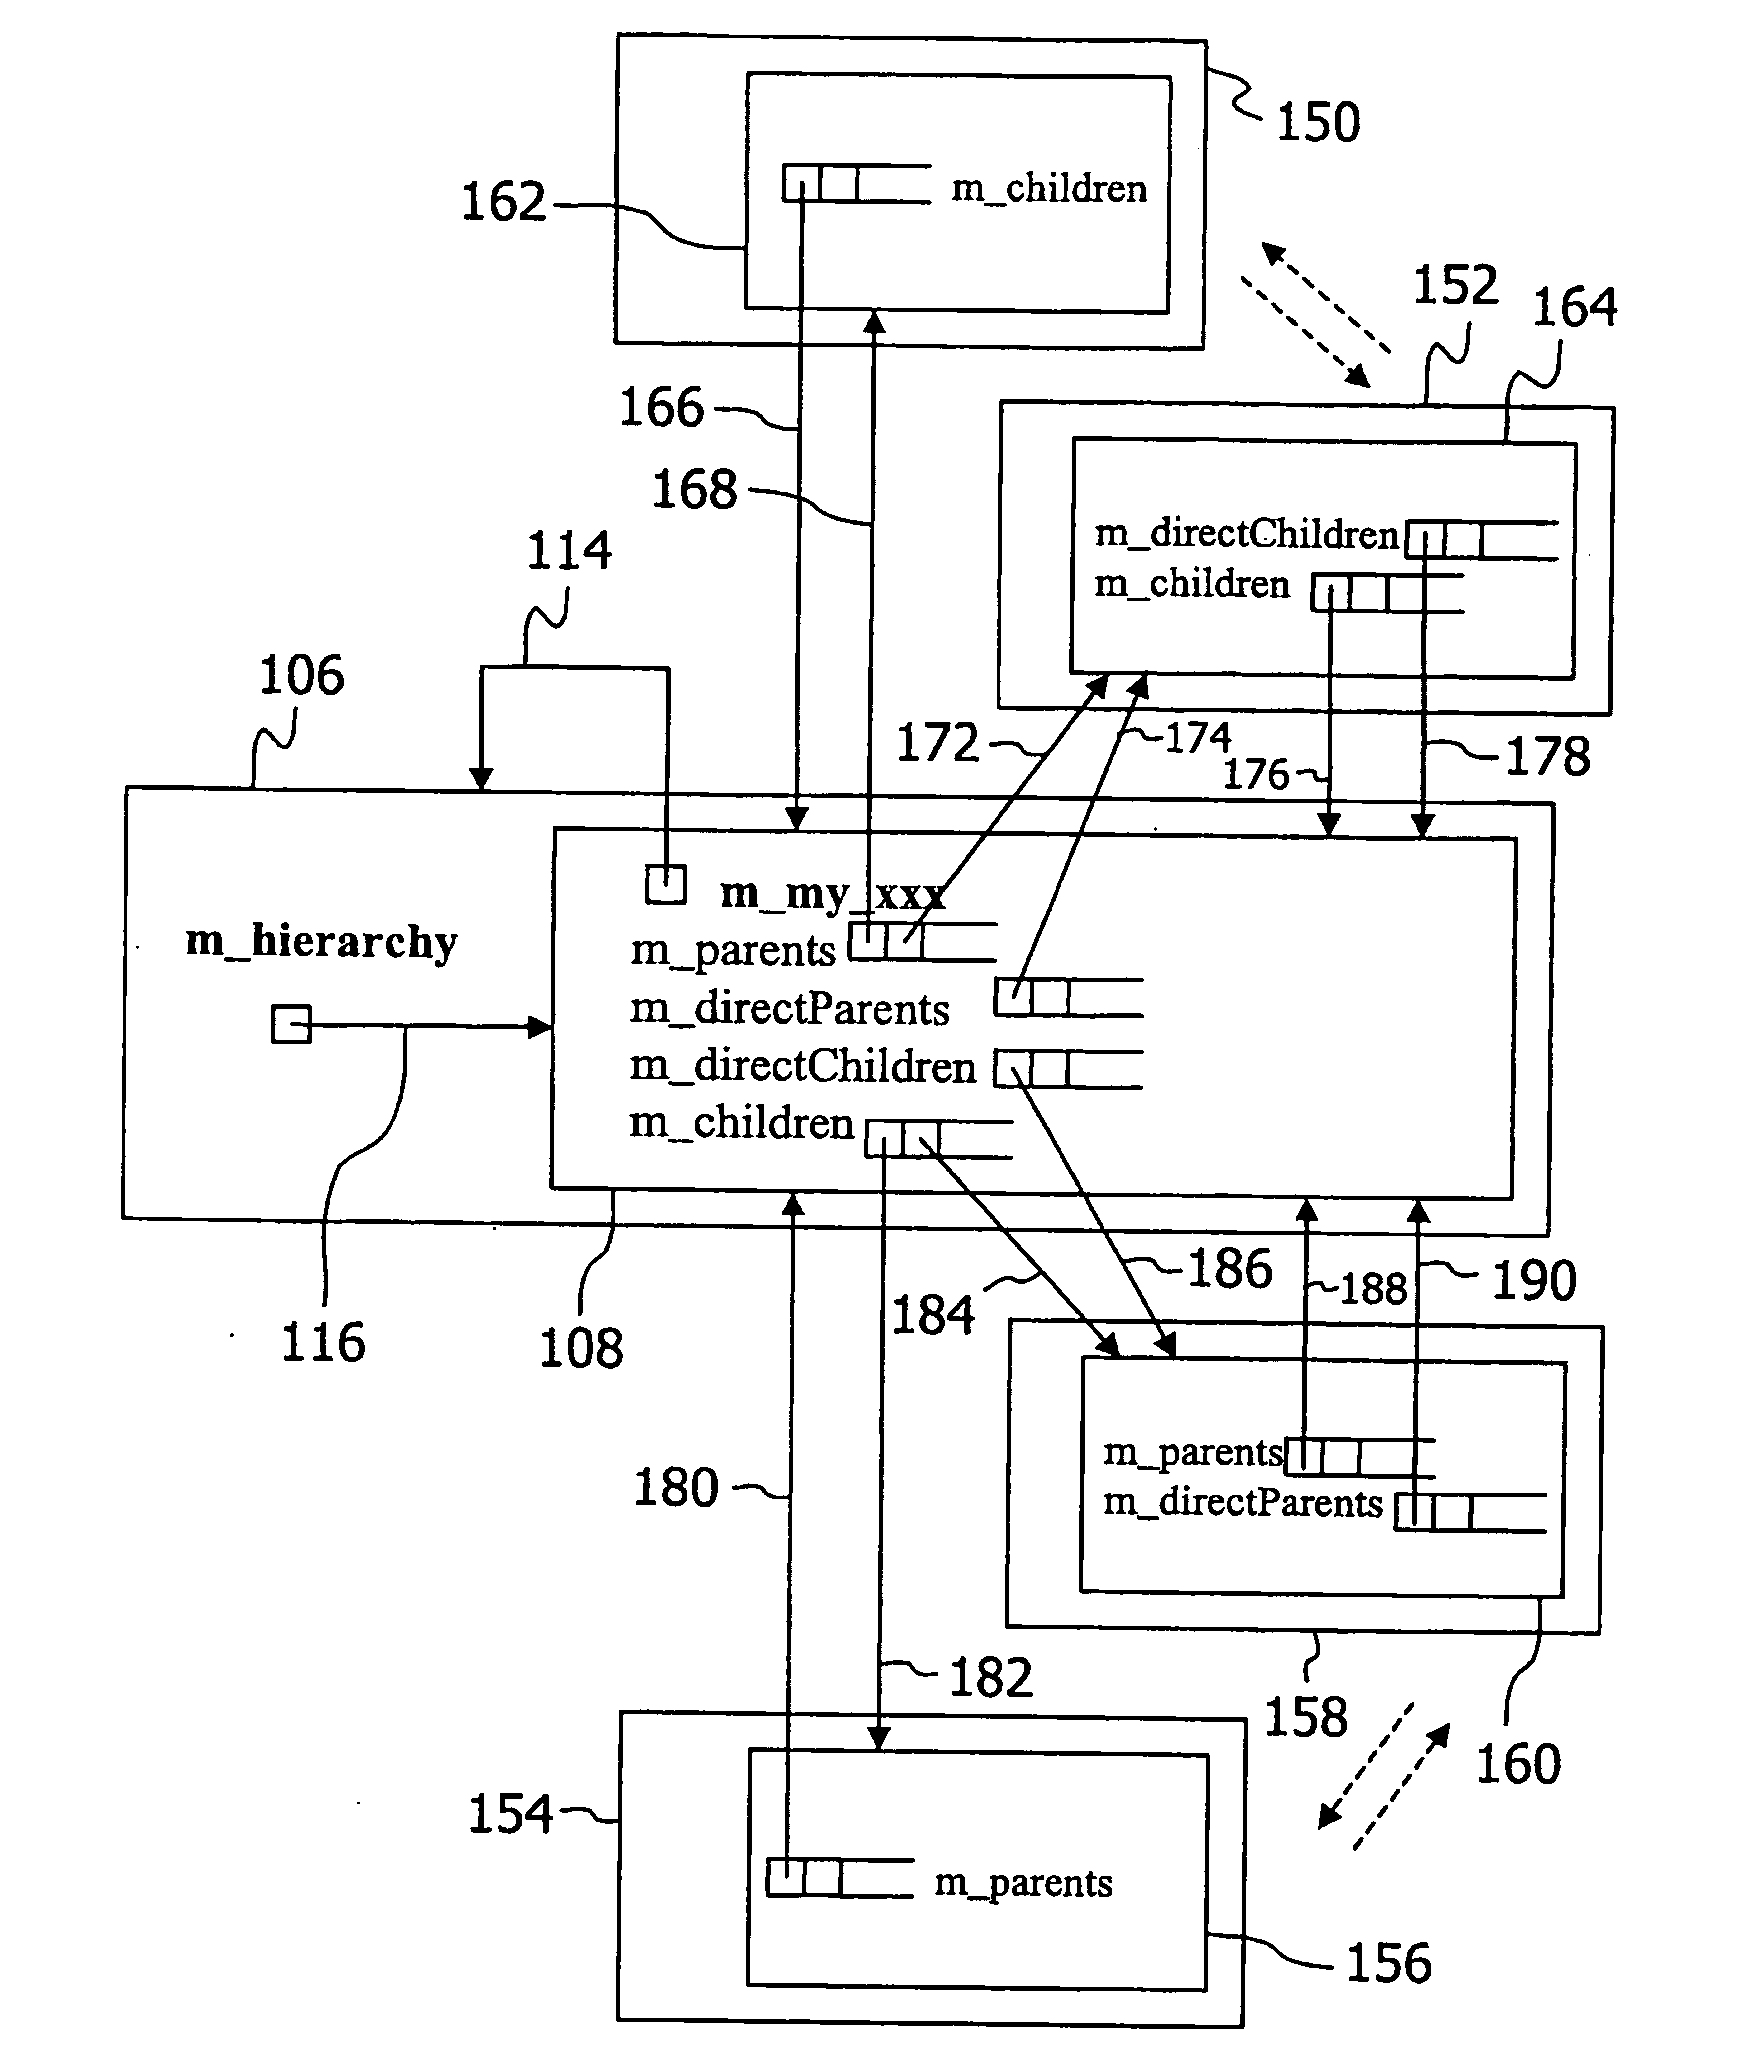 Systems, methods, and articles of manufacture for handling hierarchical application data